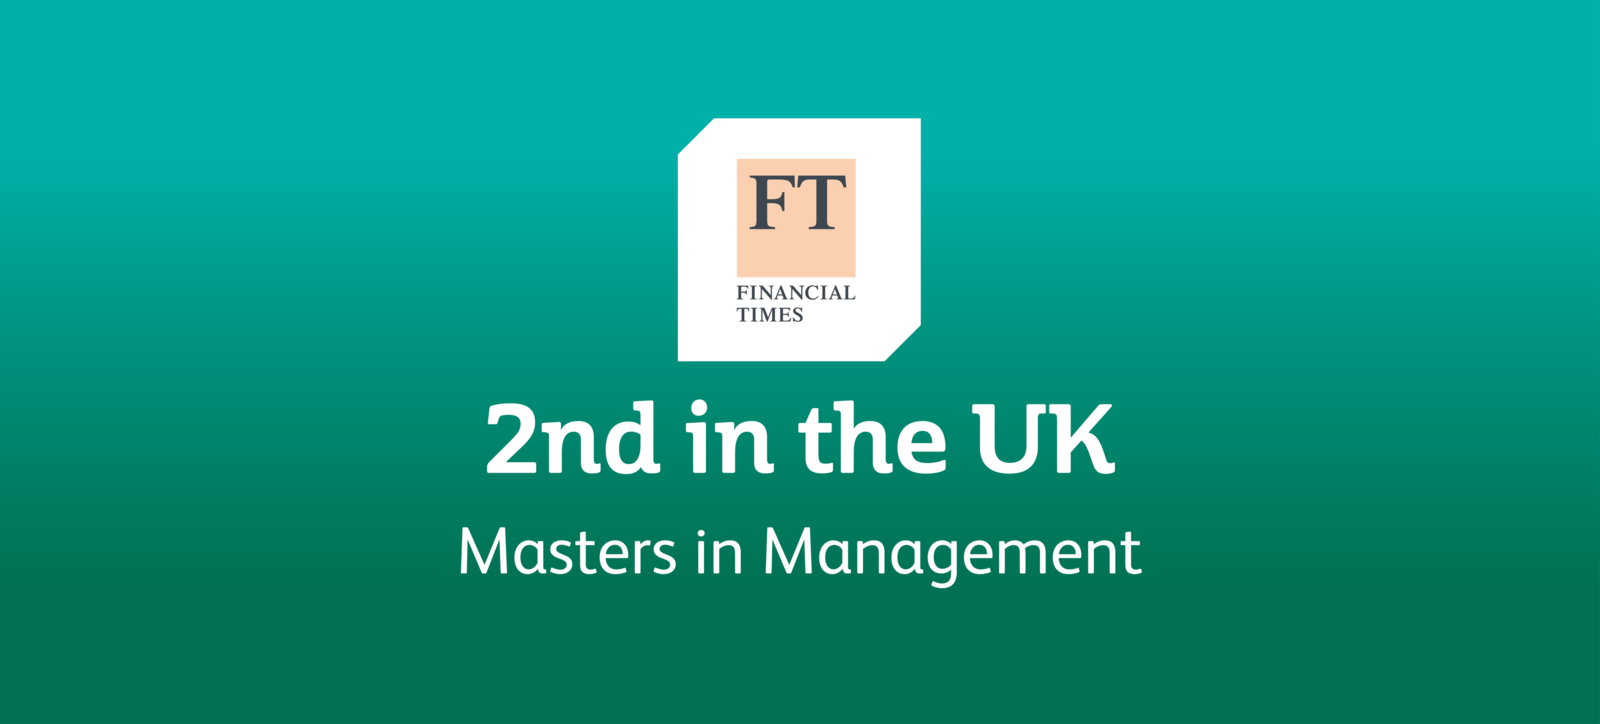 WBS second in the UK for Masters in Management